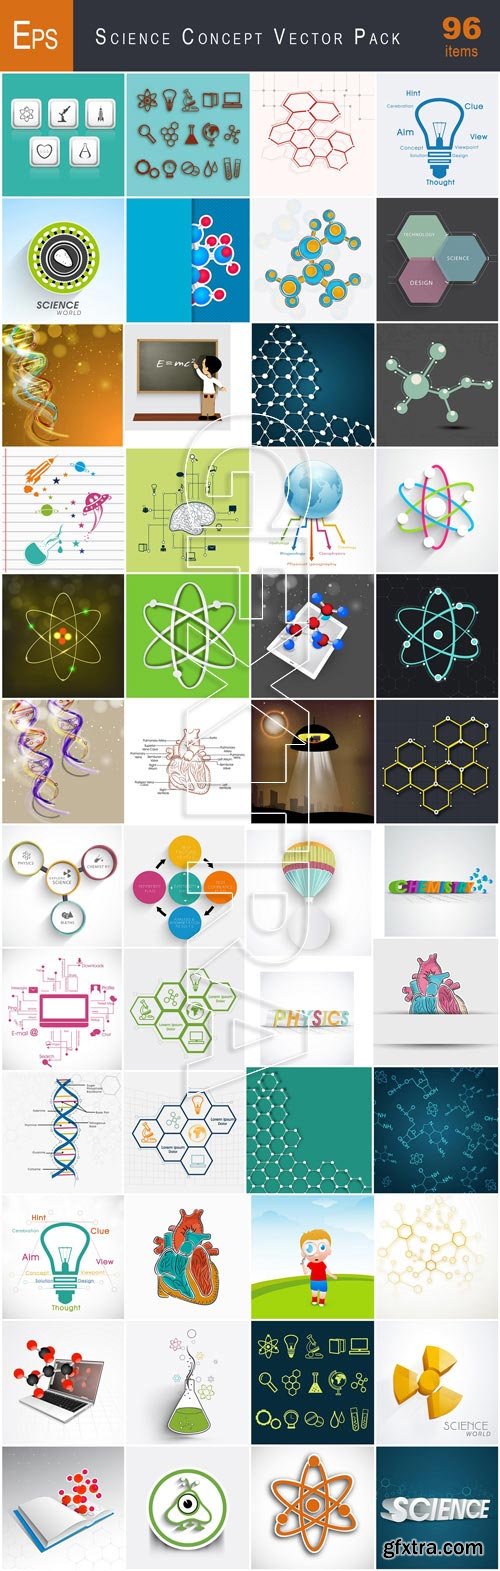 VectorCity Science Concept Vector Pack